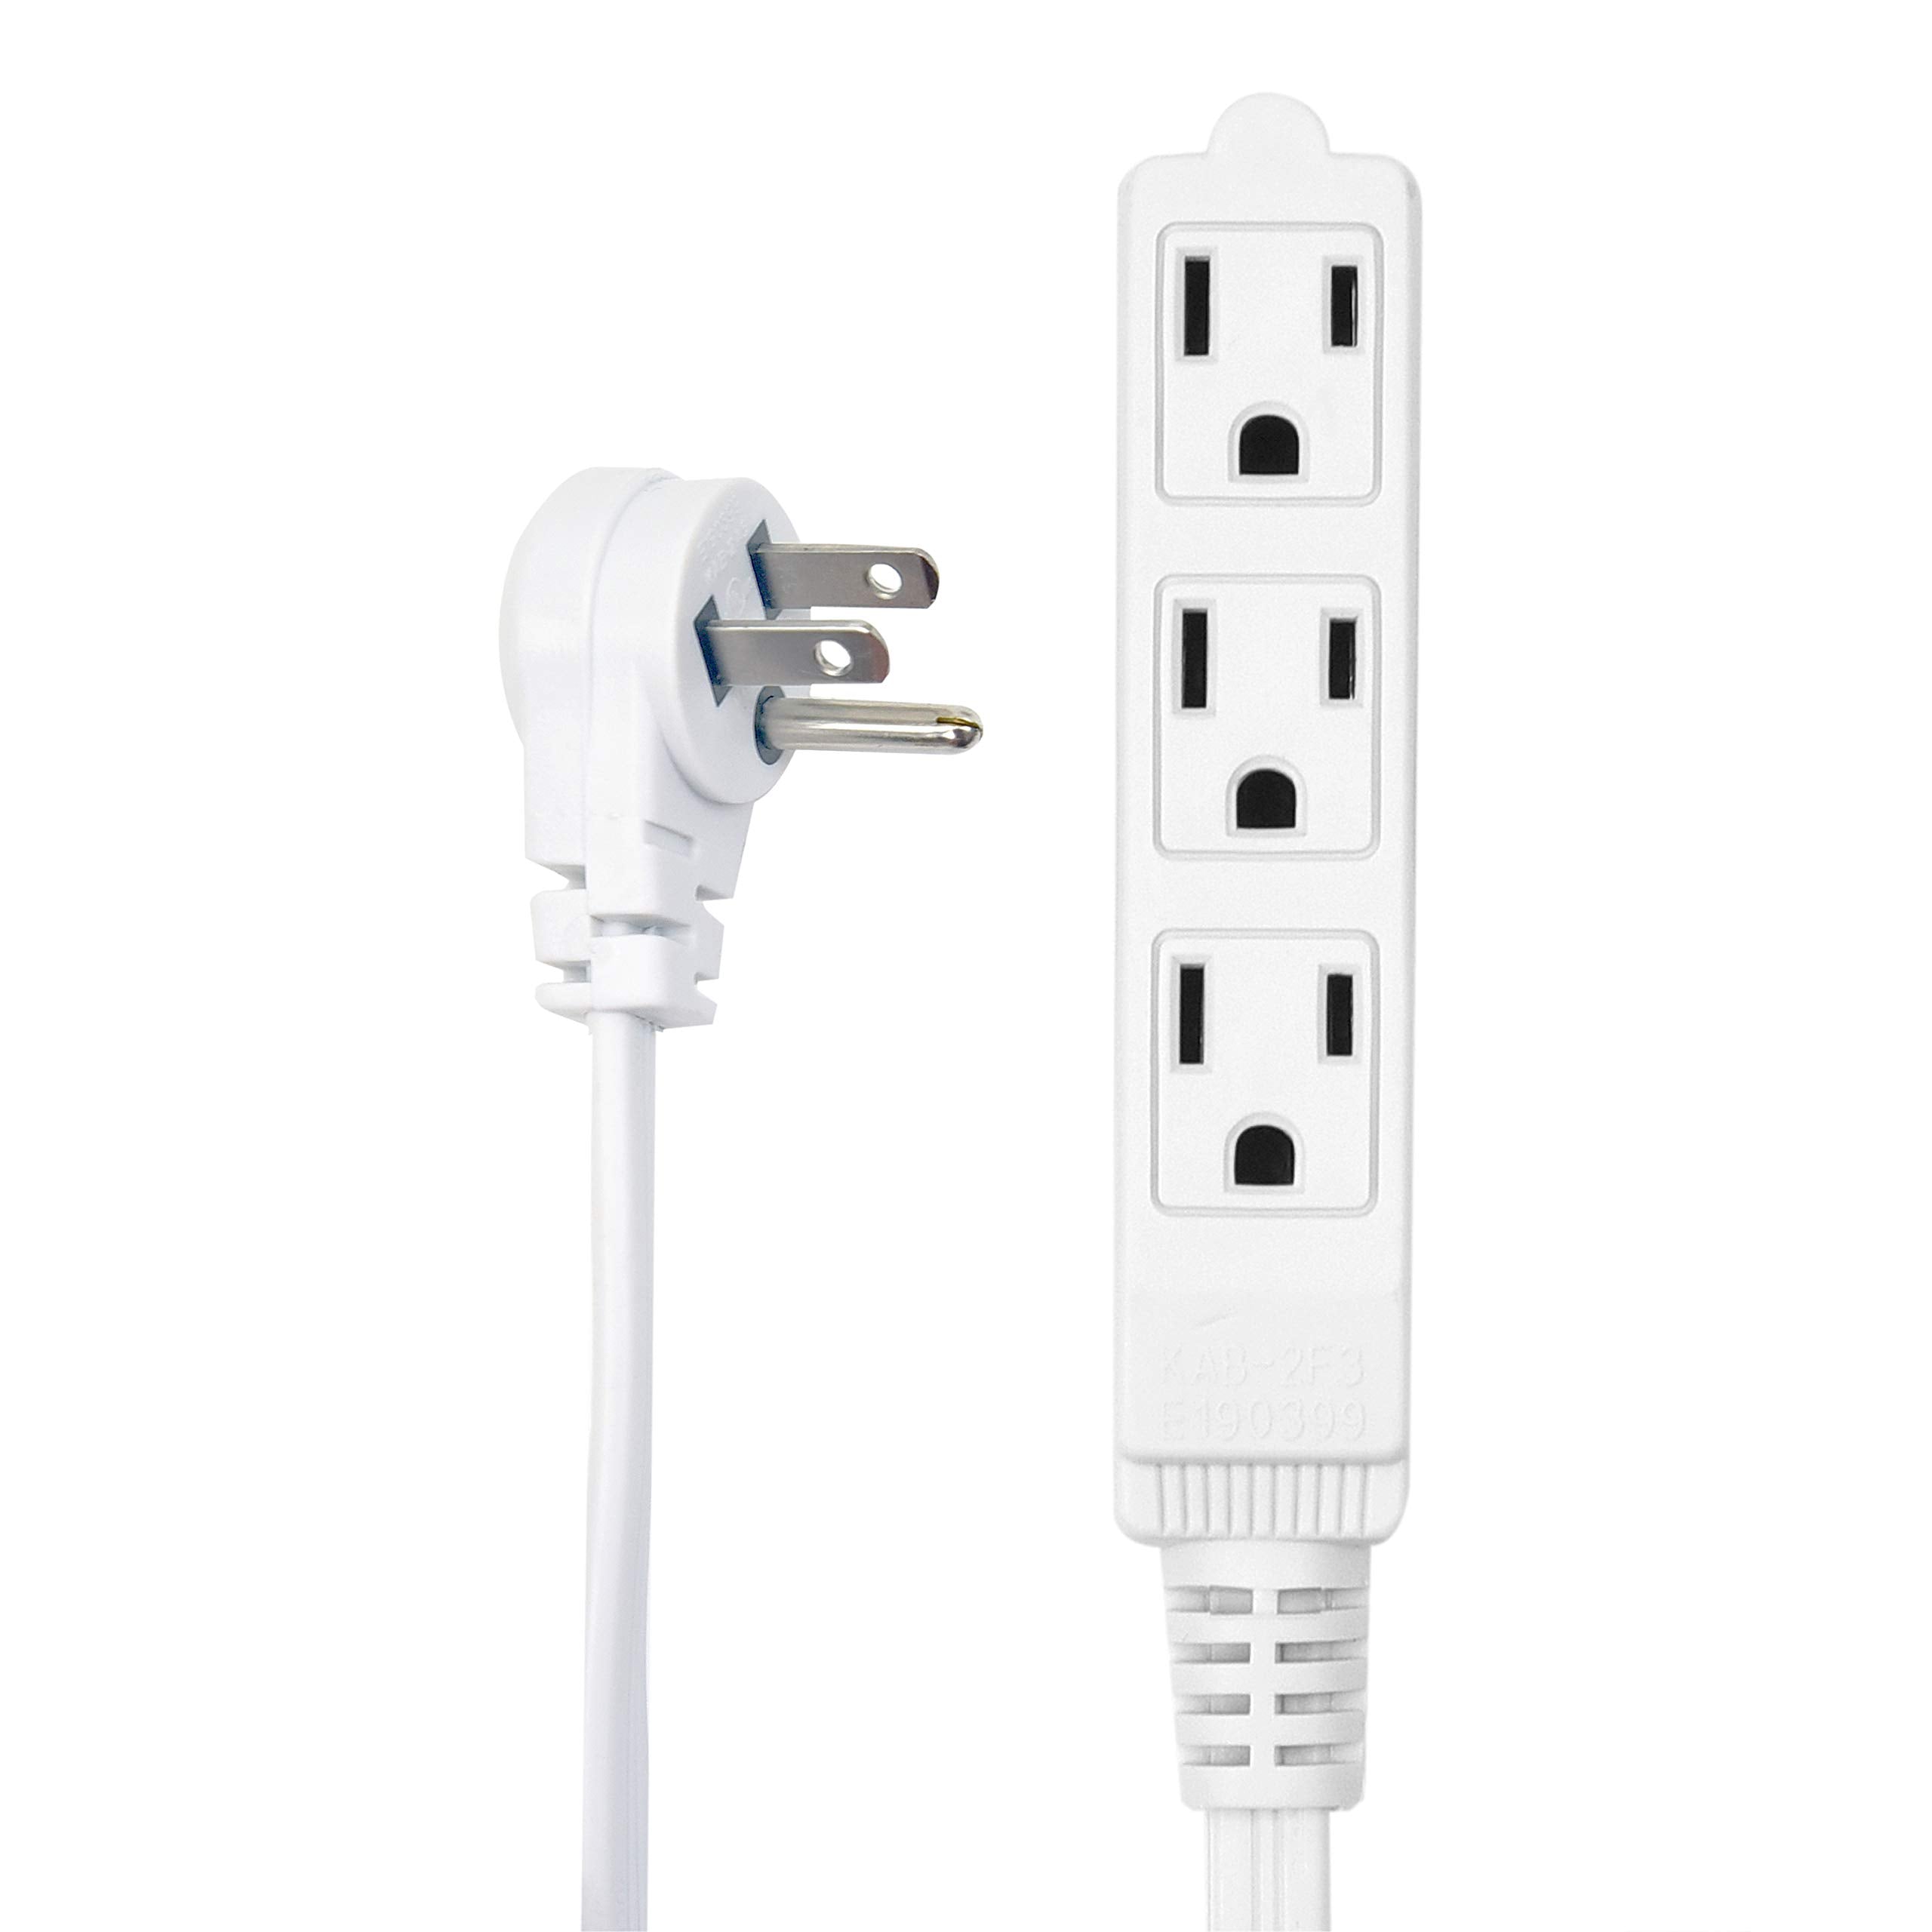 Flat Multiple Outlet Extension Cord 10 Ft for Indoor Use by Electes- UL-Listed 3-Prong Multi Extension Wire- Space-Saving Flat Angled Extension Cord- White  - Acceptable